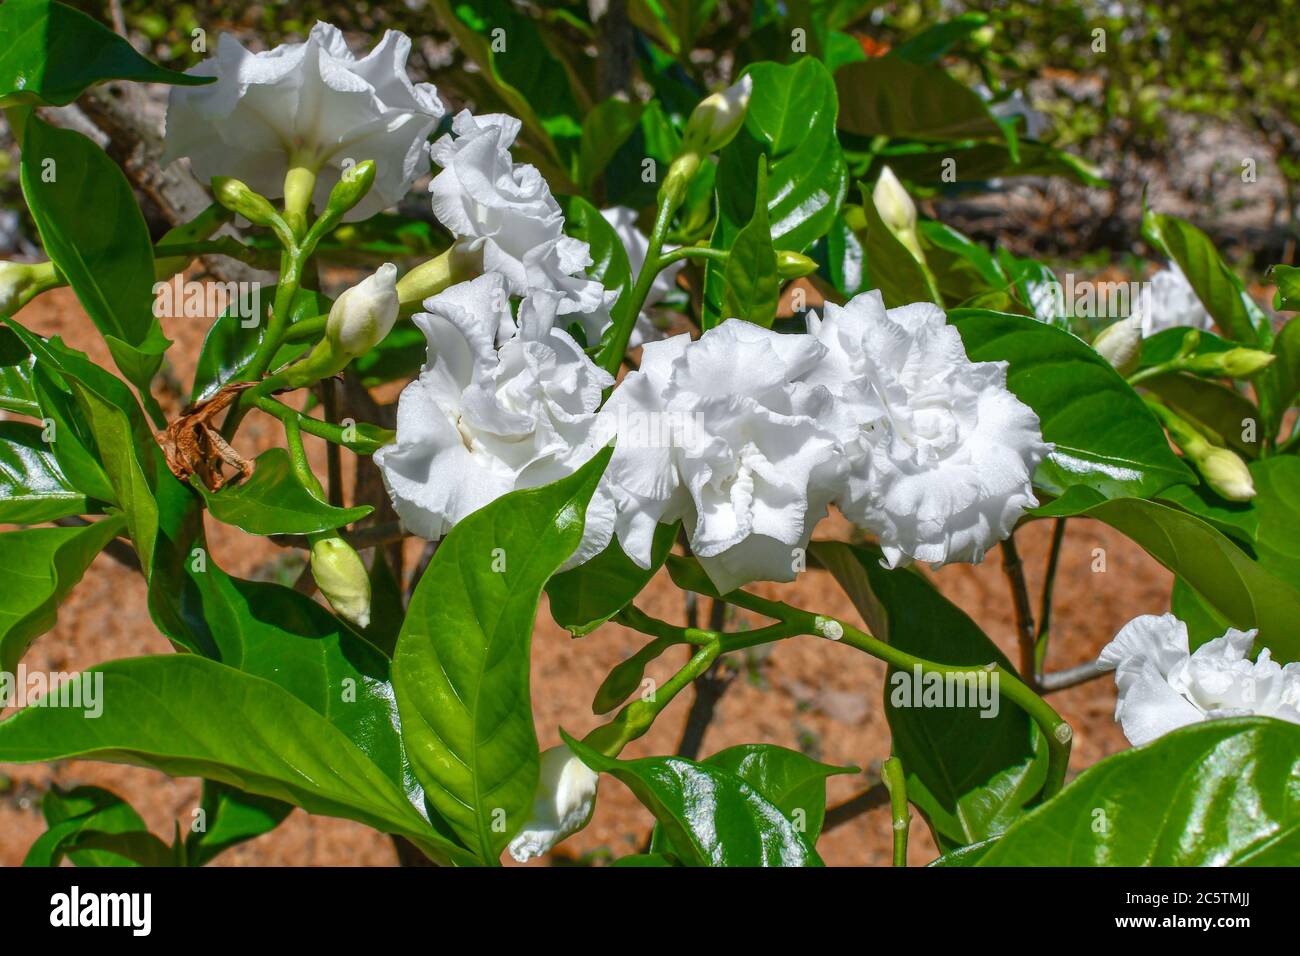 White Tulip flowers With Green Leaves & Branches At The Garden on Daylight. Stock Photo